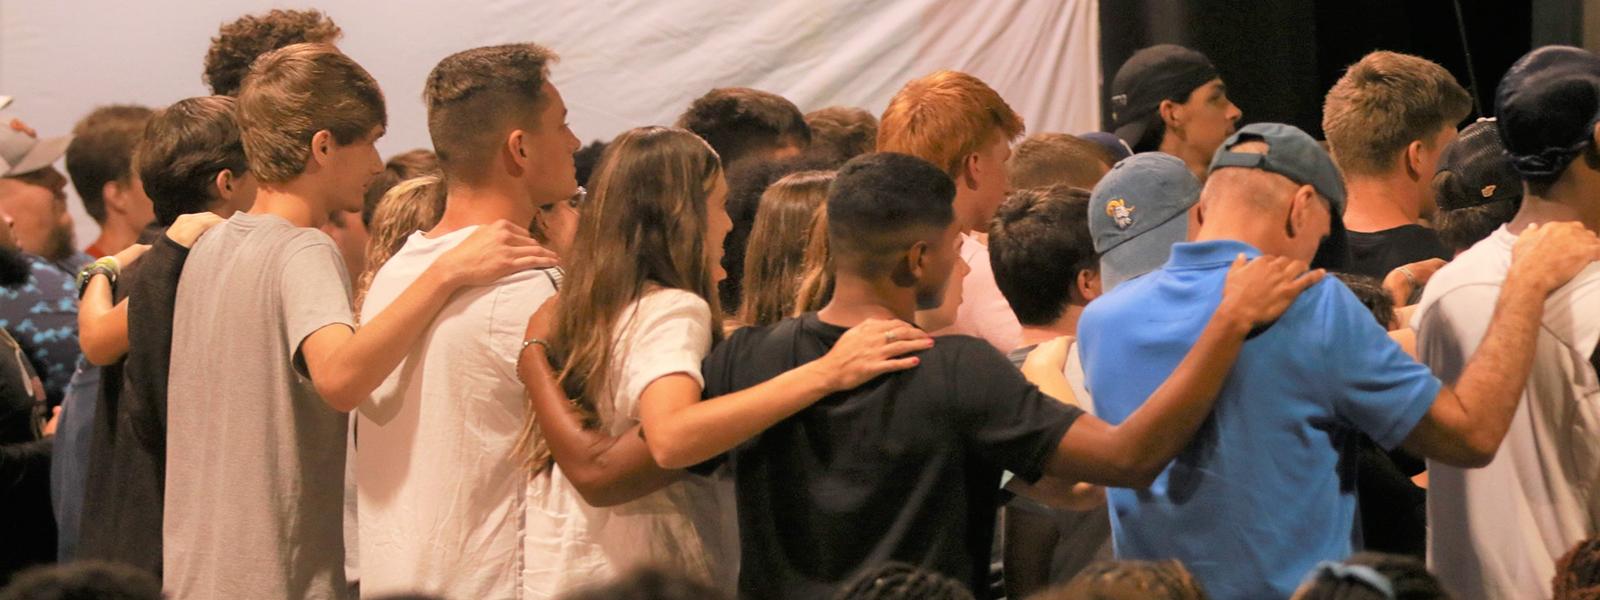 CIU students gather in unity before Christ. 